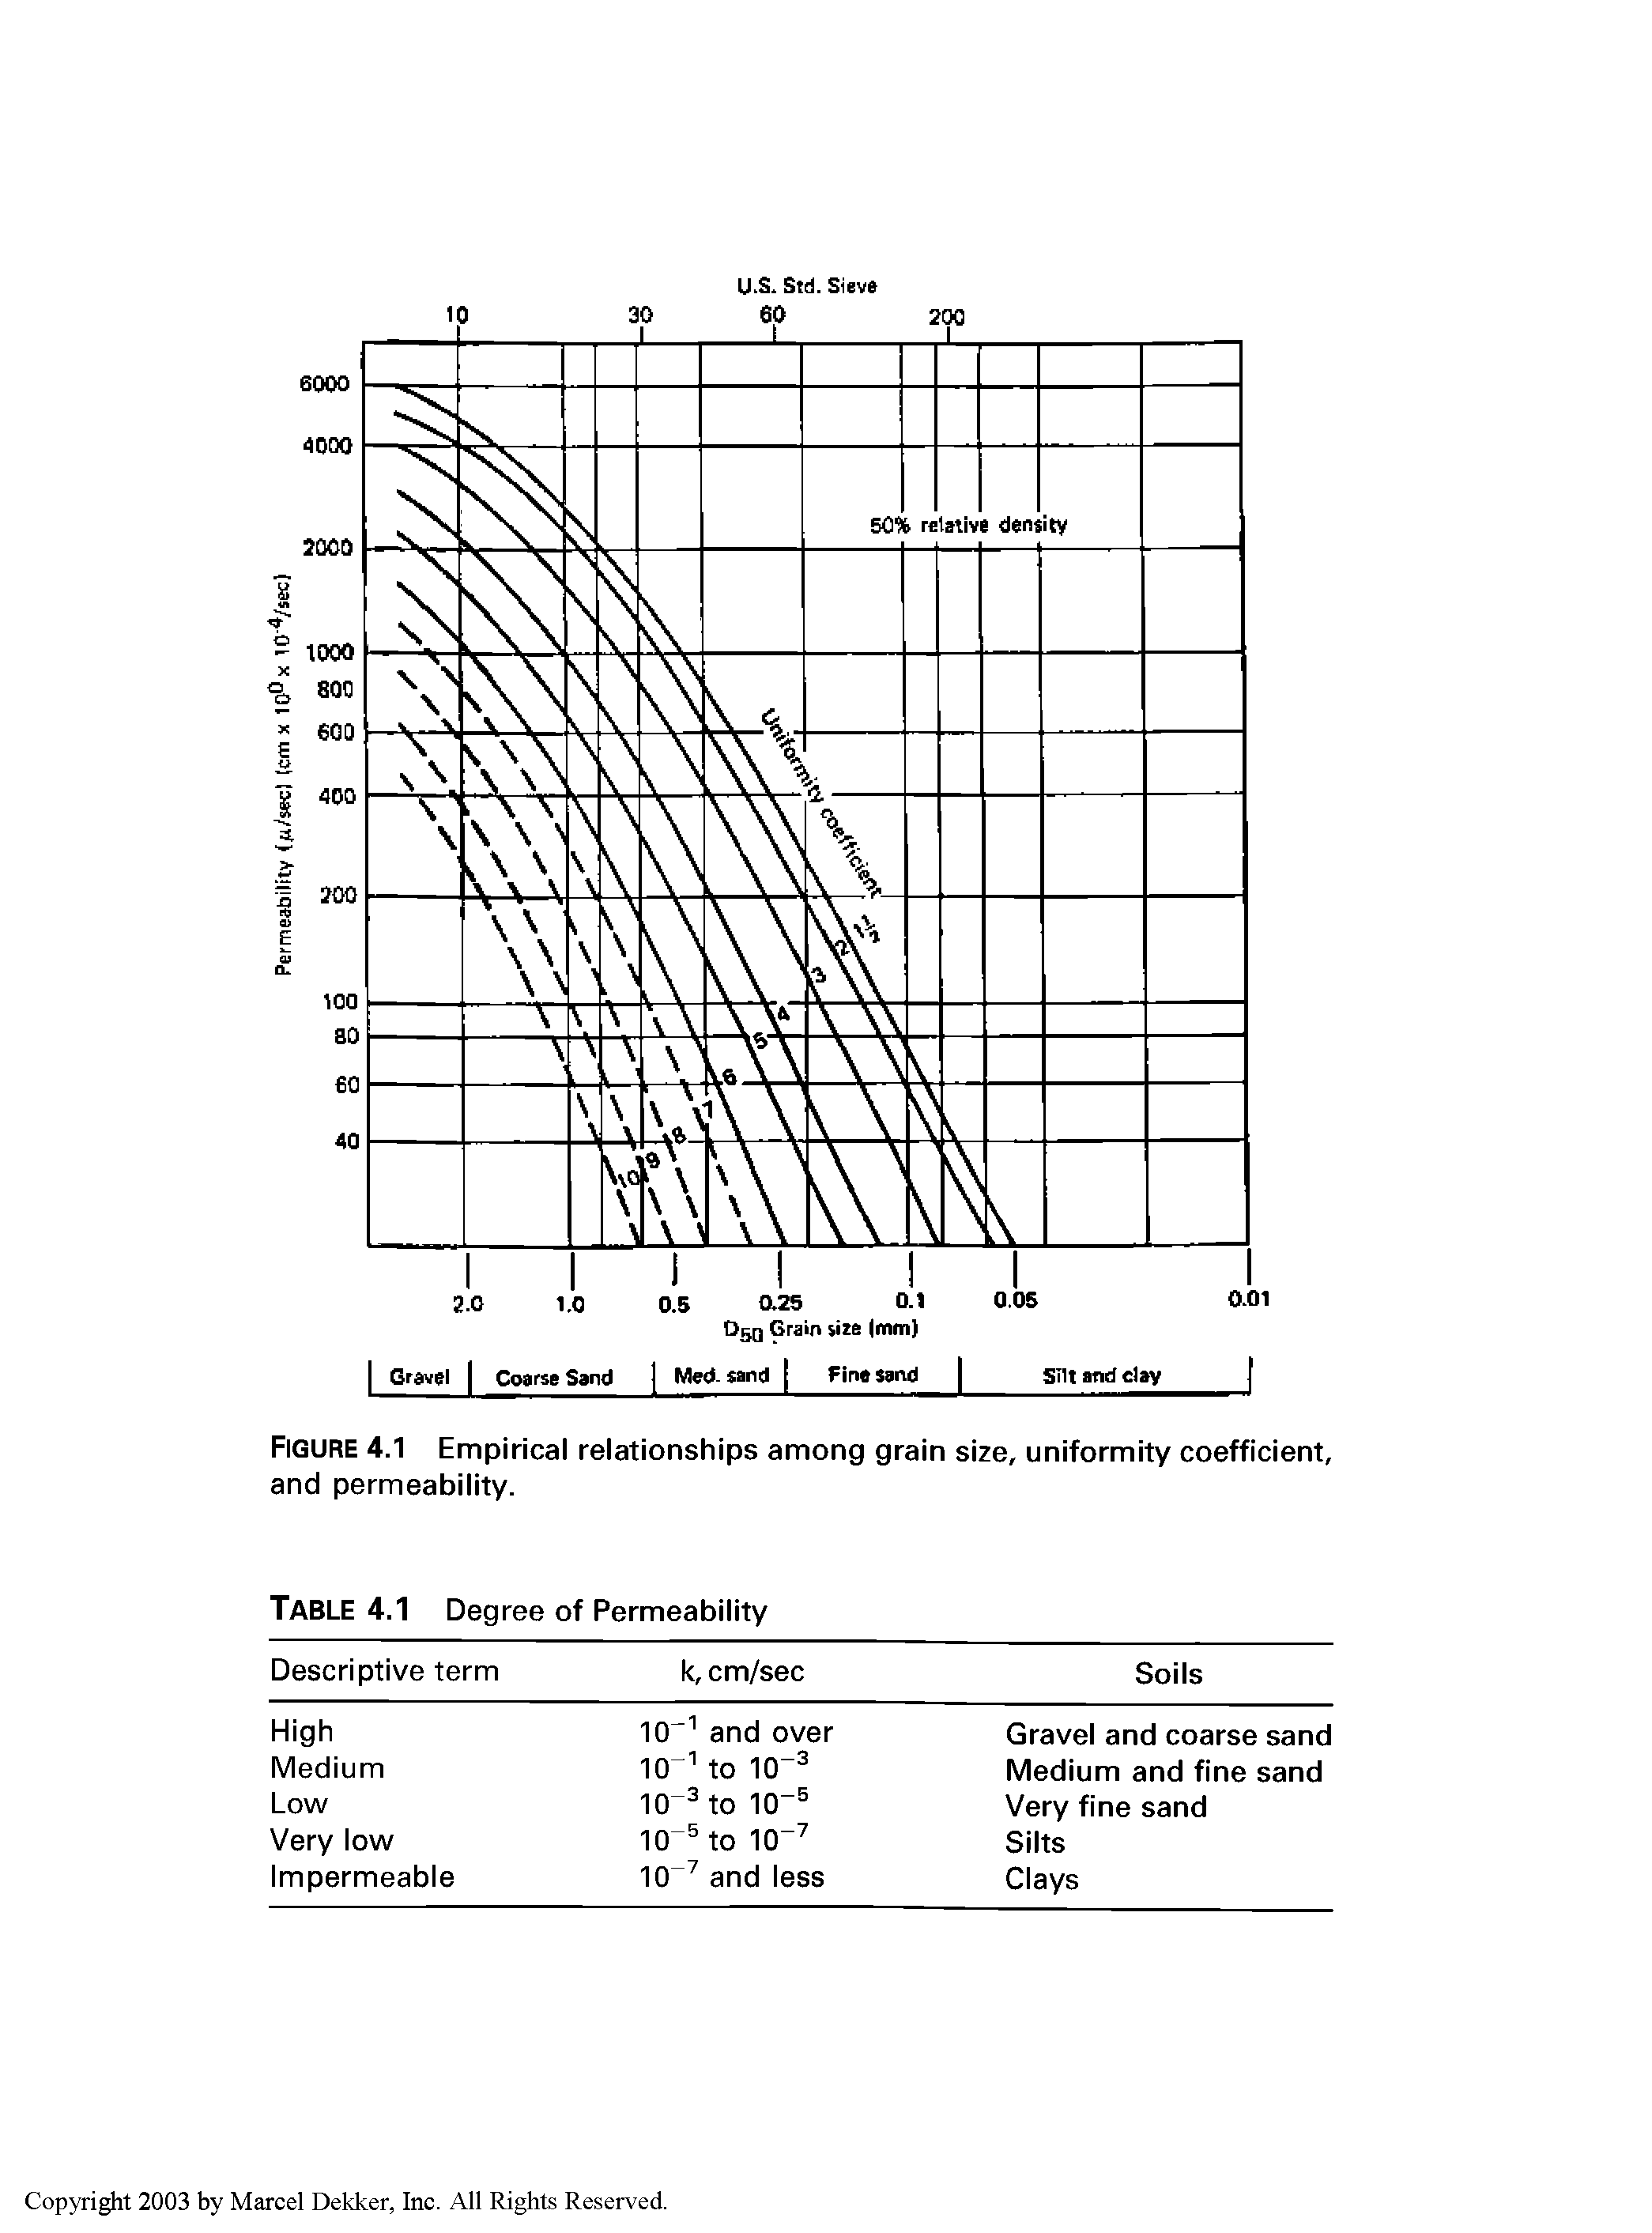 Figure 4.1 Empirical relationships among grain size, uniformity coefficient, and permeability.